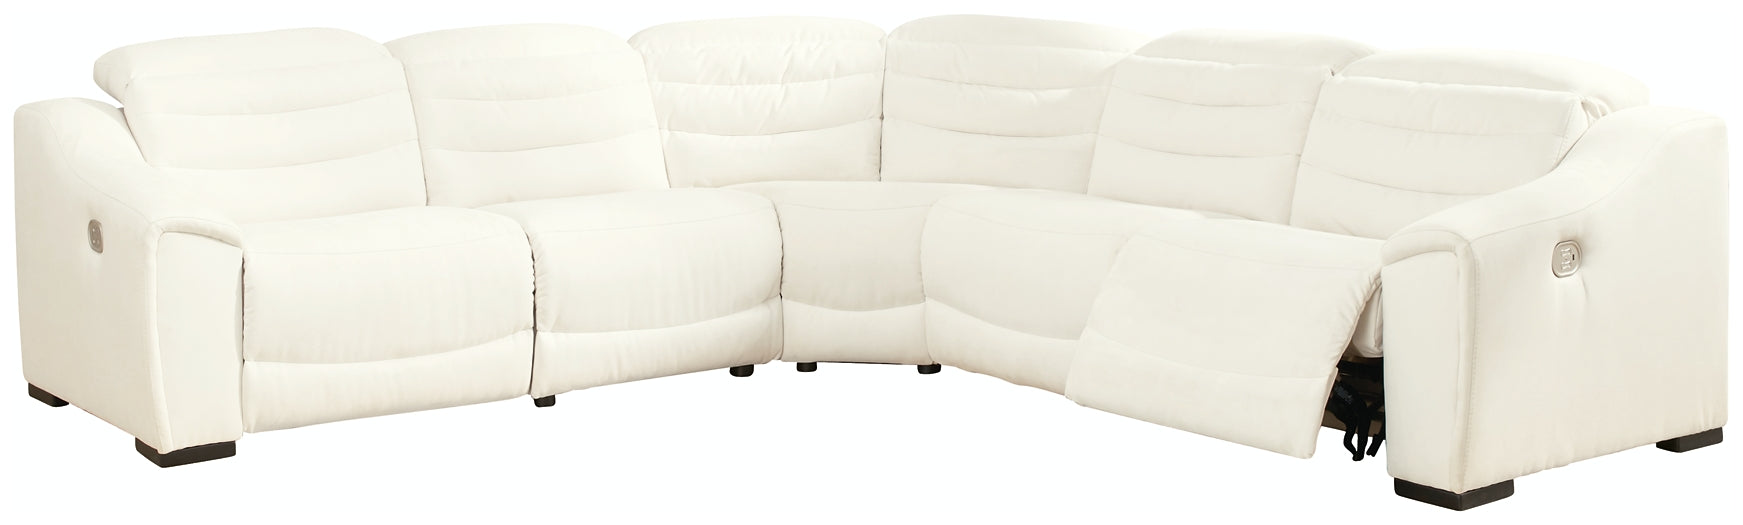 Next-Gen Gaucho 5-Piece Sectional with Recliner JB's Furniture  Home Furniture, Home Decor, Furniture Store